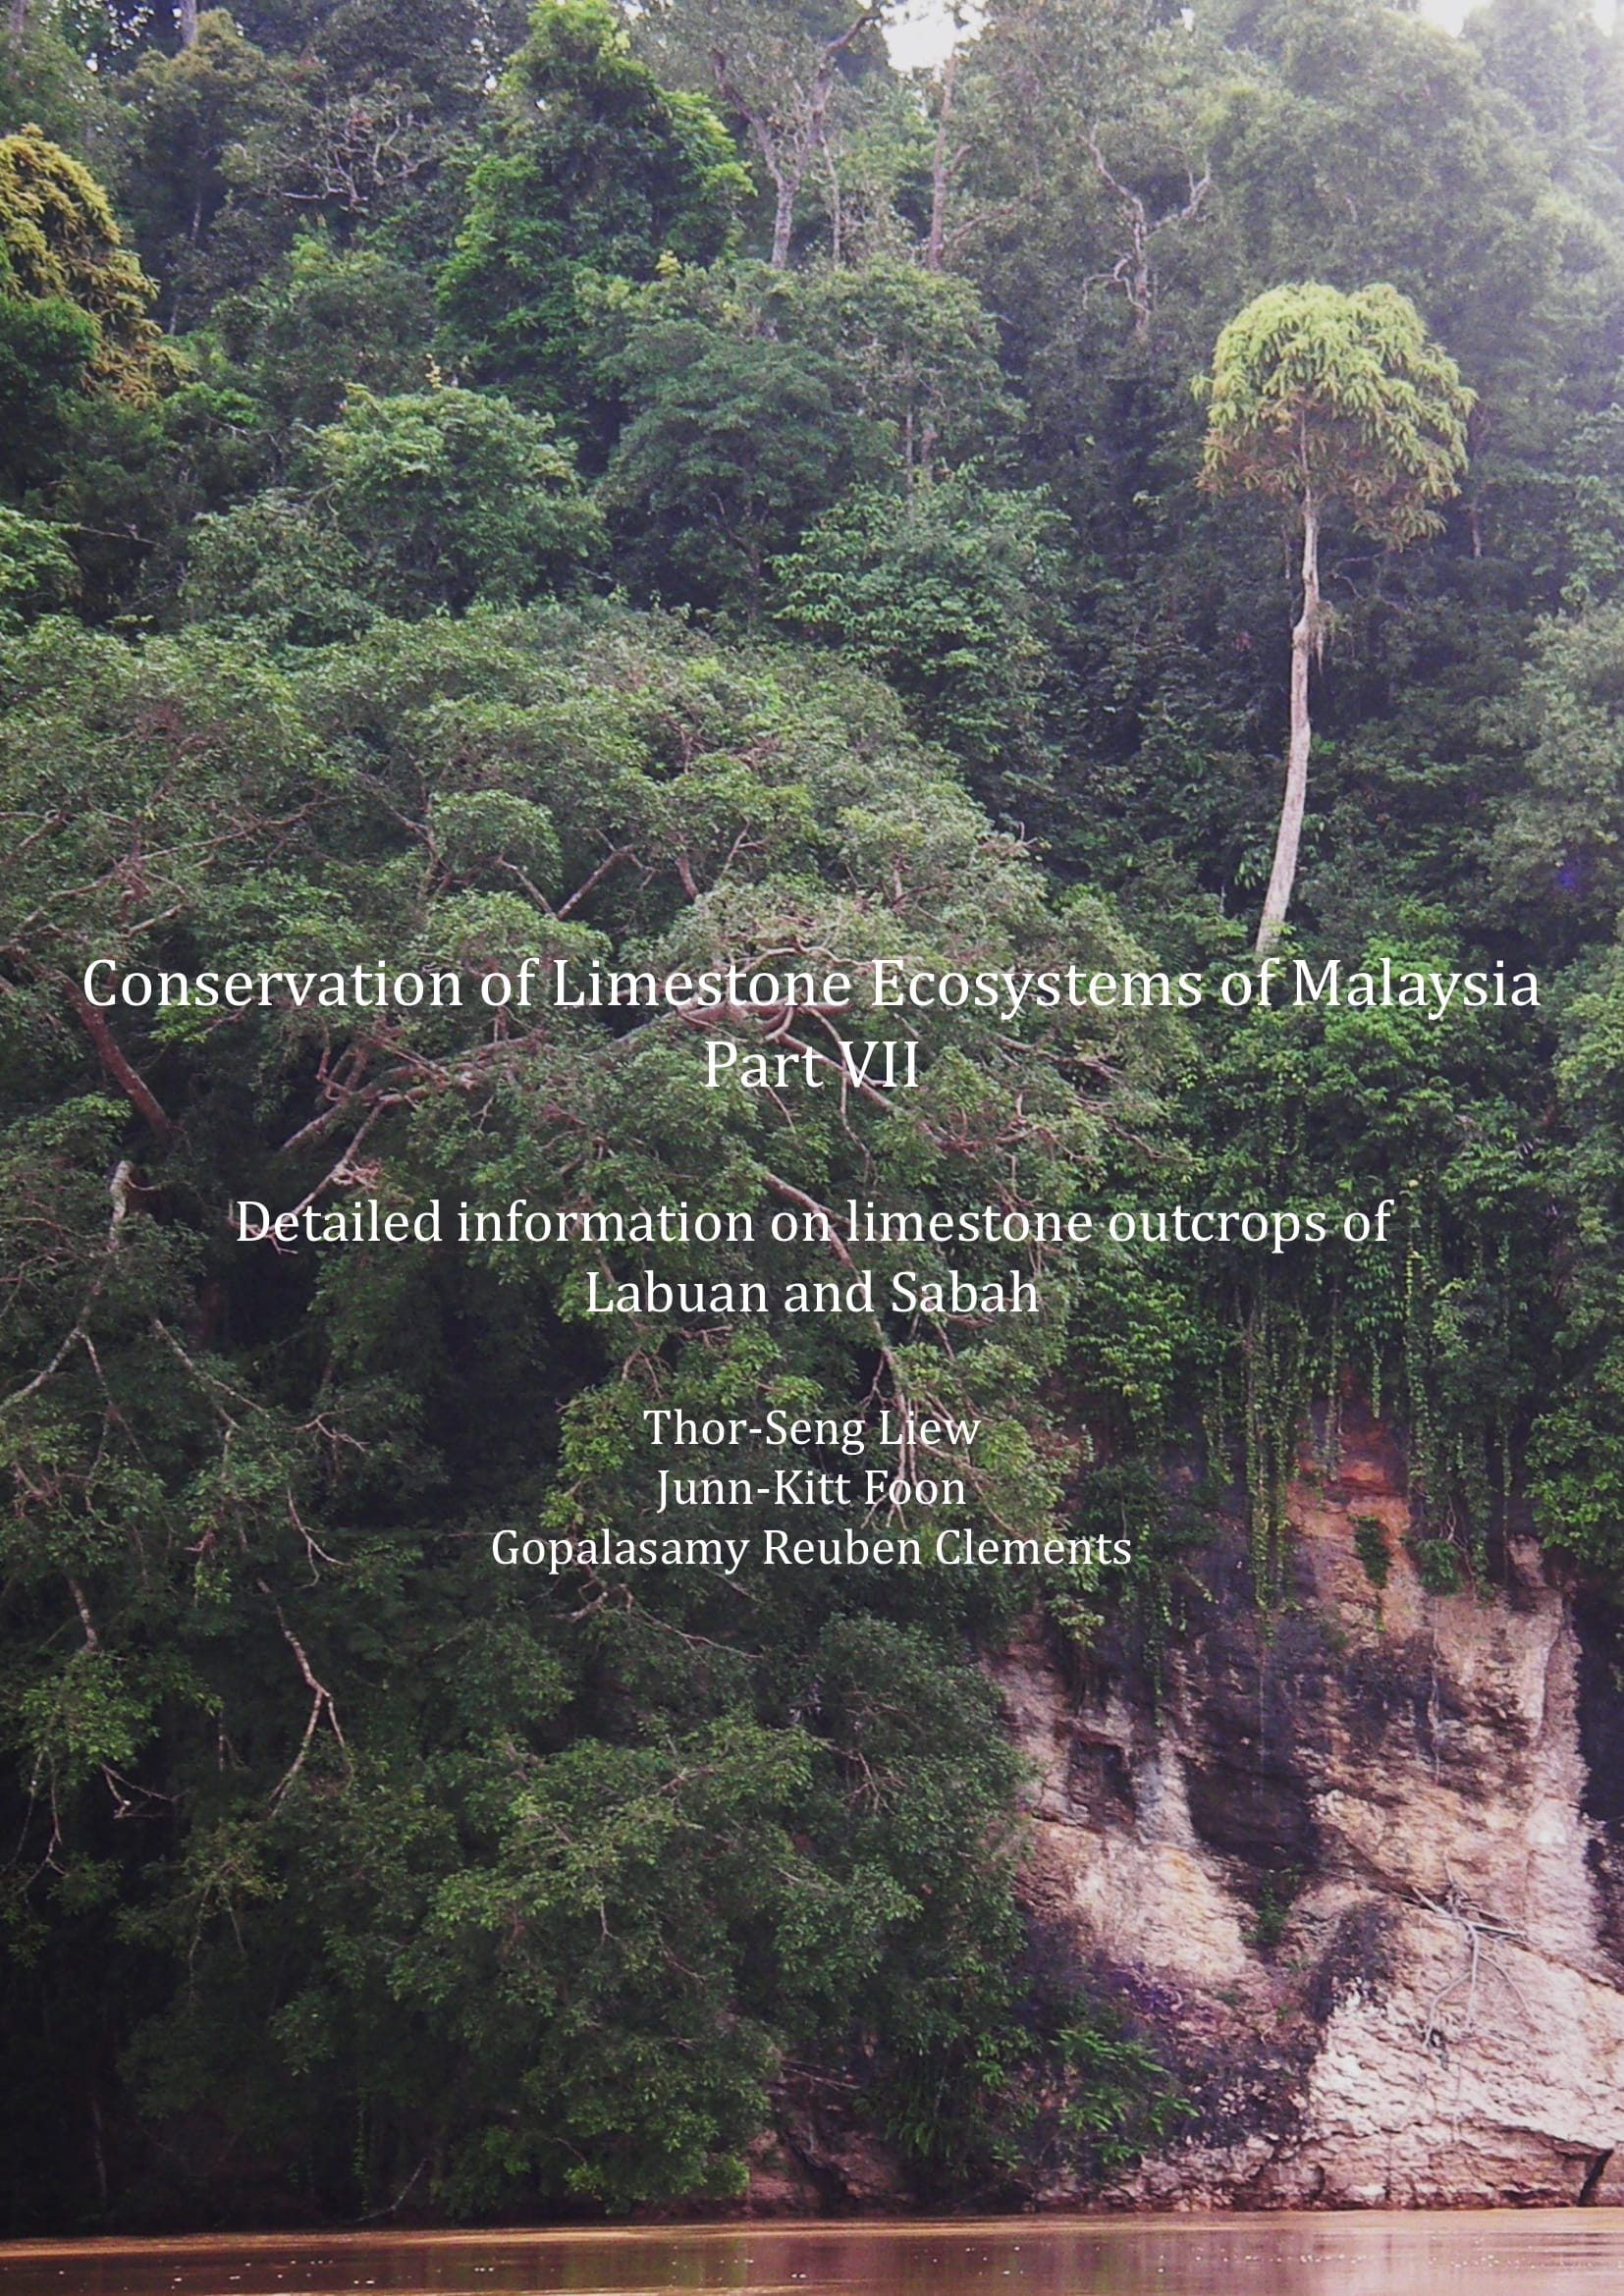 Conservation of Limestone Ecosystems of Malaysia, Part VII, Detailed information on limestone outcrops of Labuan and Sabah.